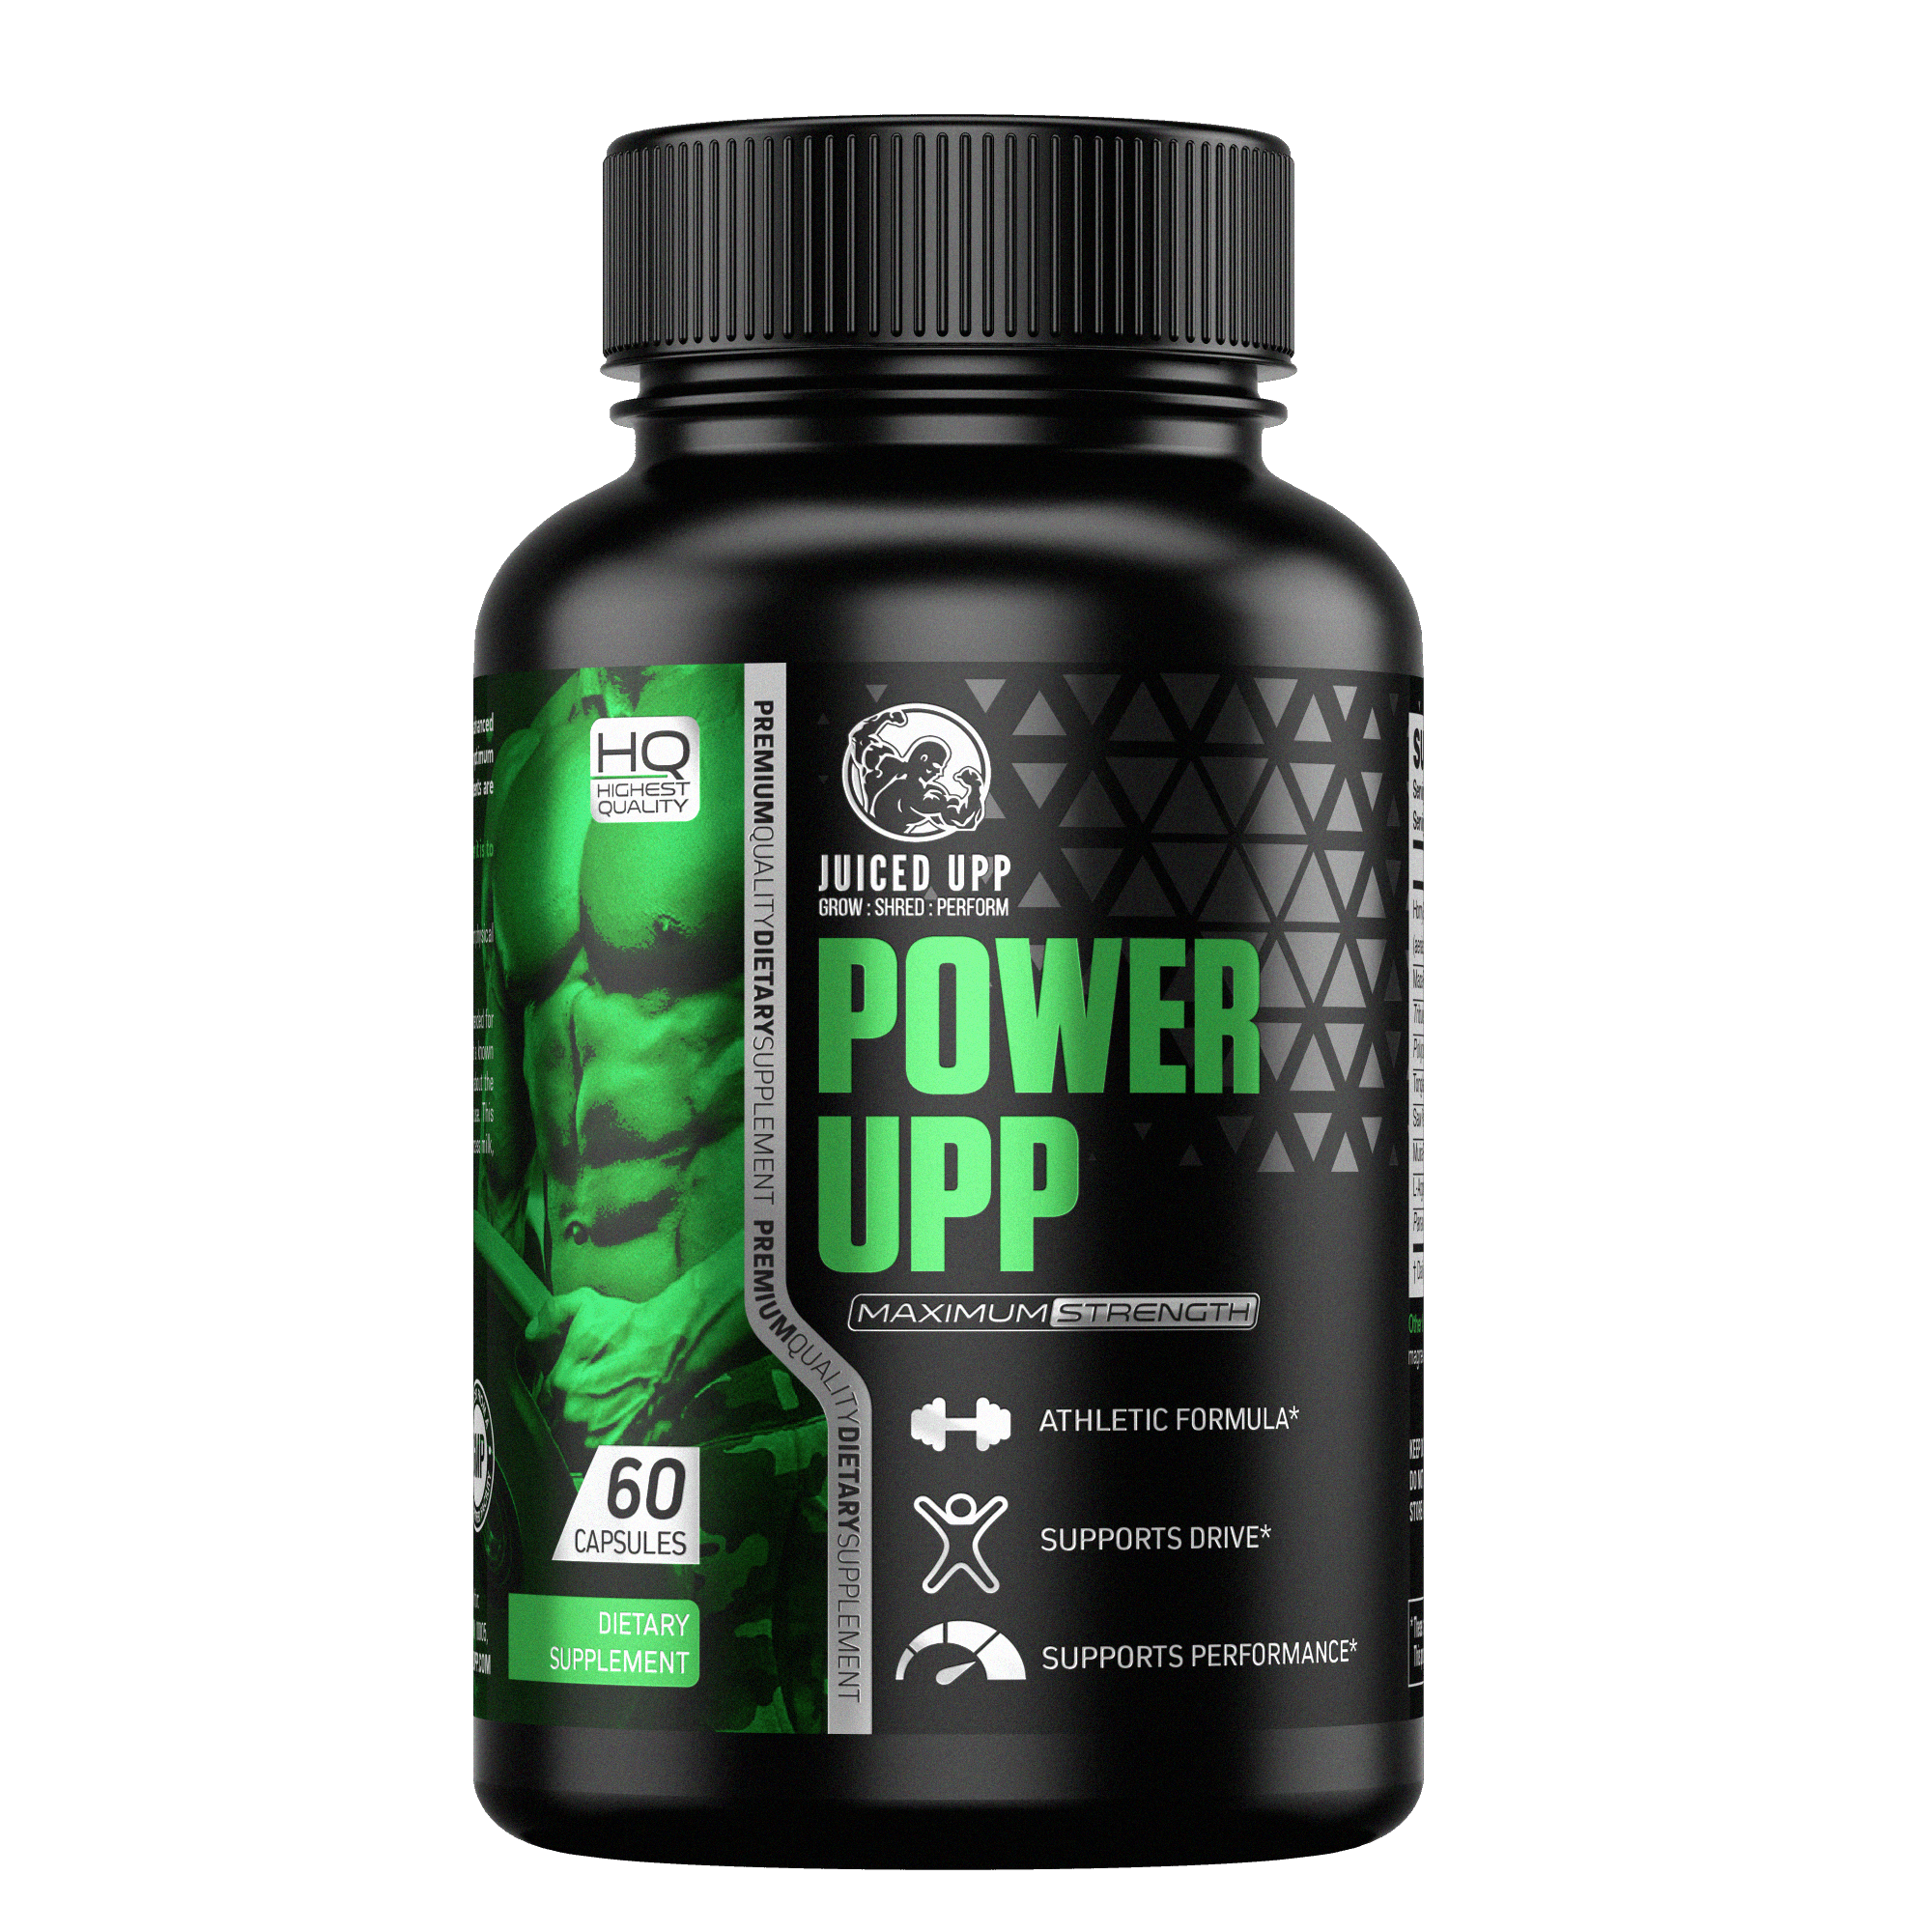 POWER UPP - Juiced Upp - 100% Natural Fitness and Wellbeing Supplements